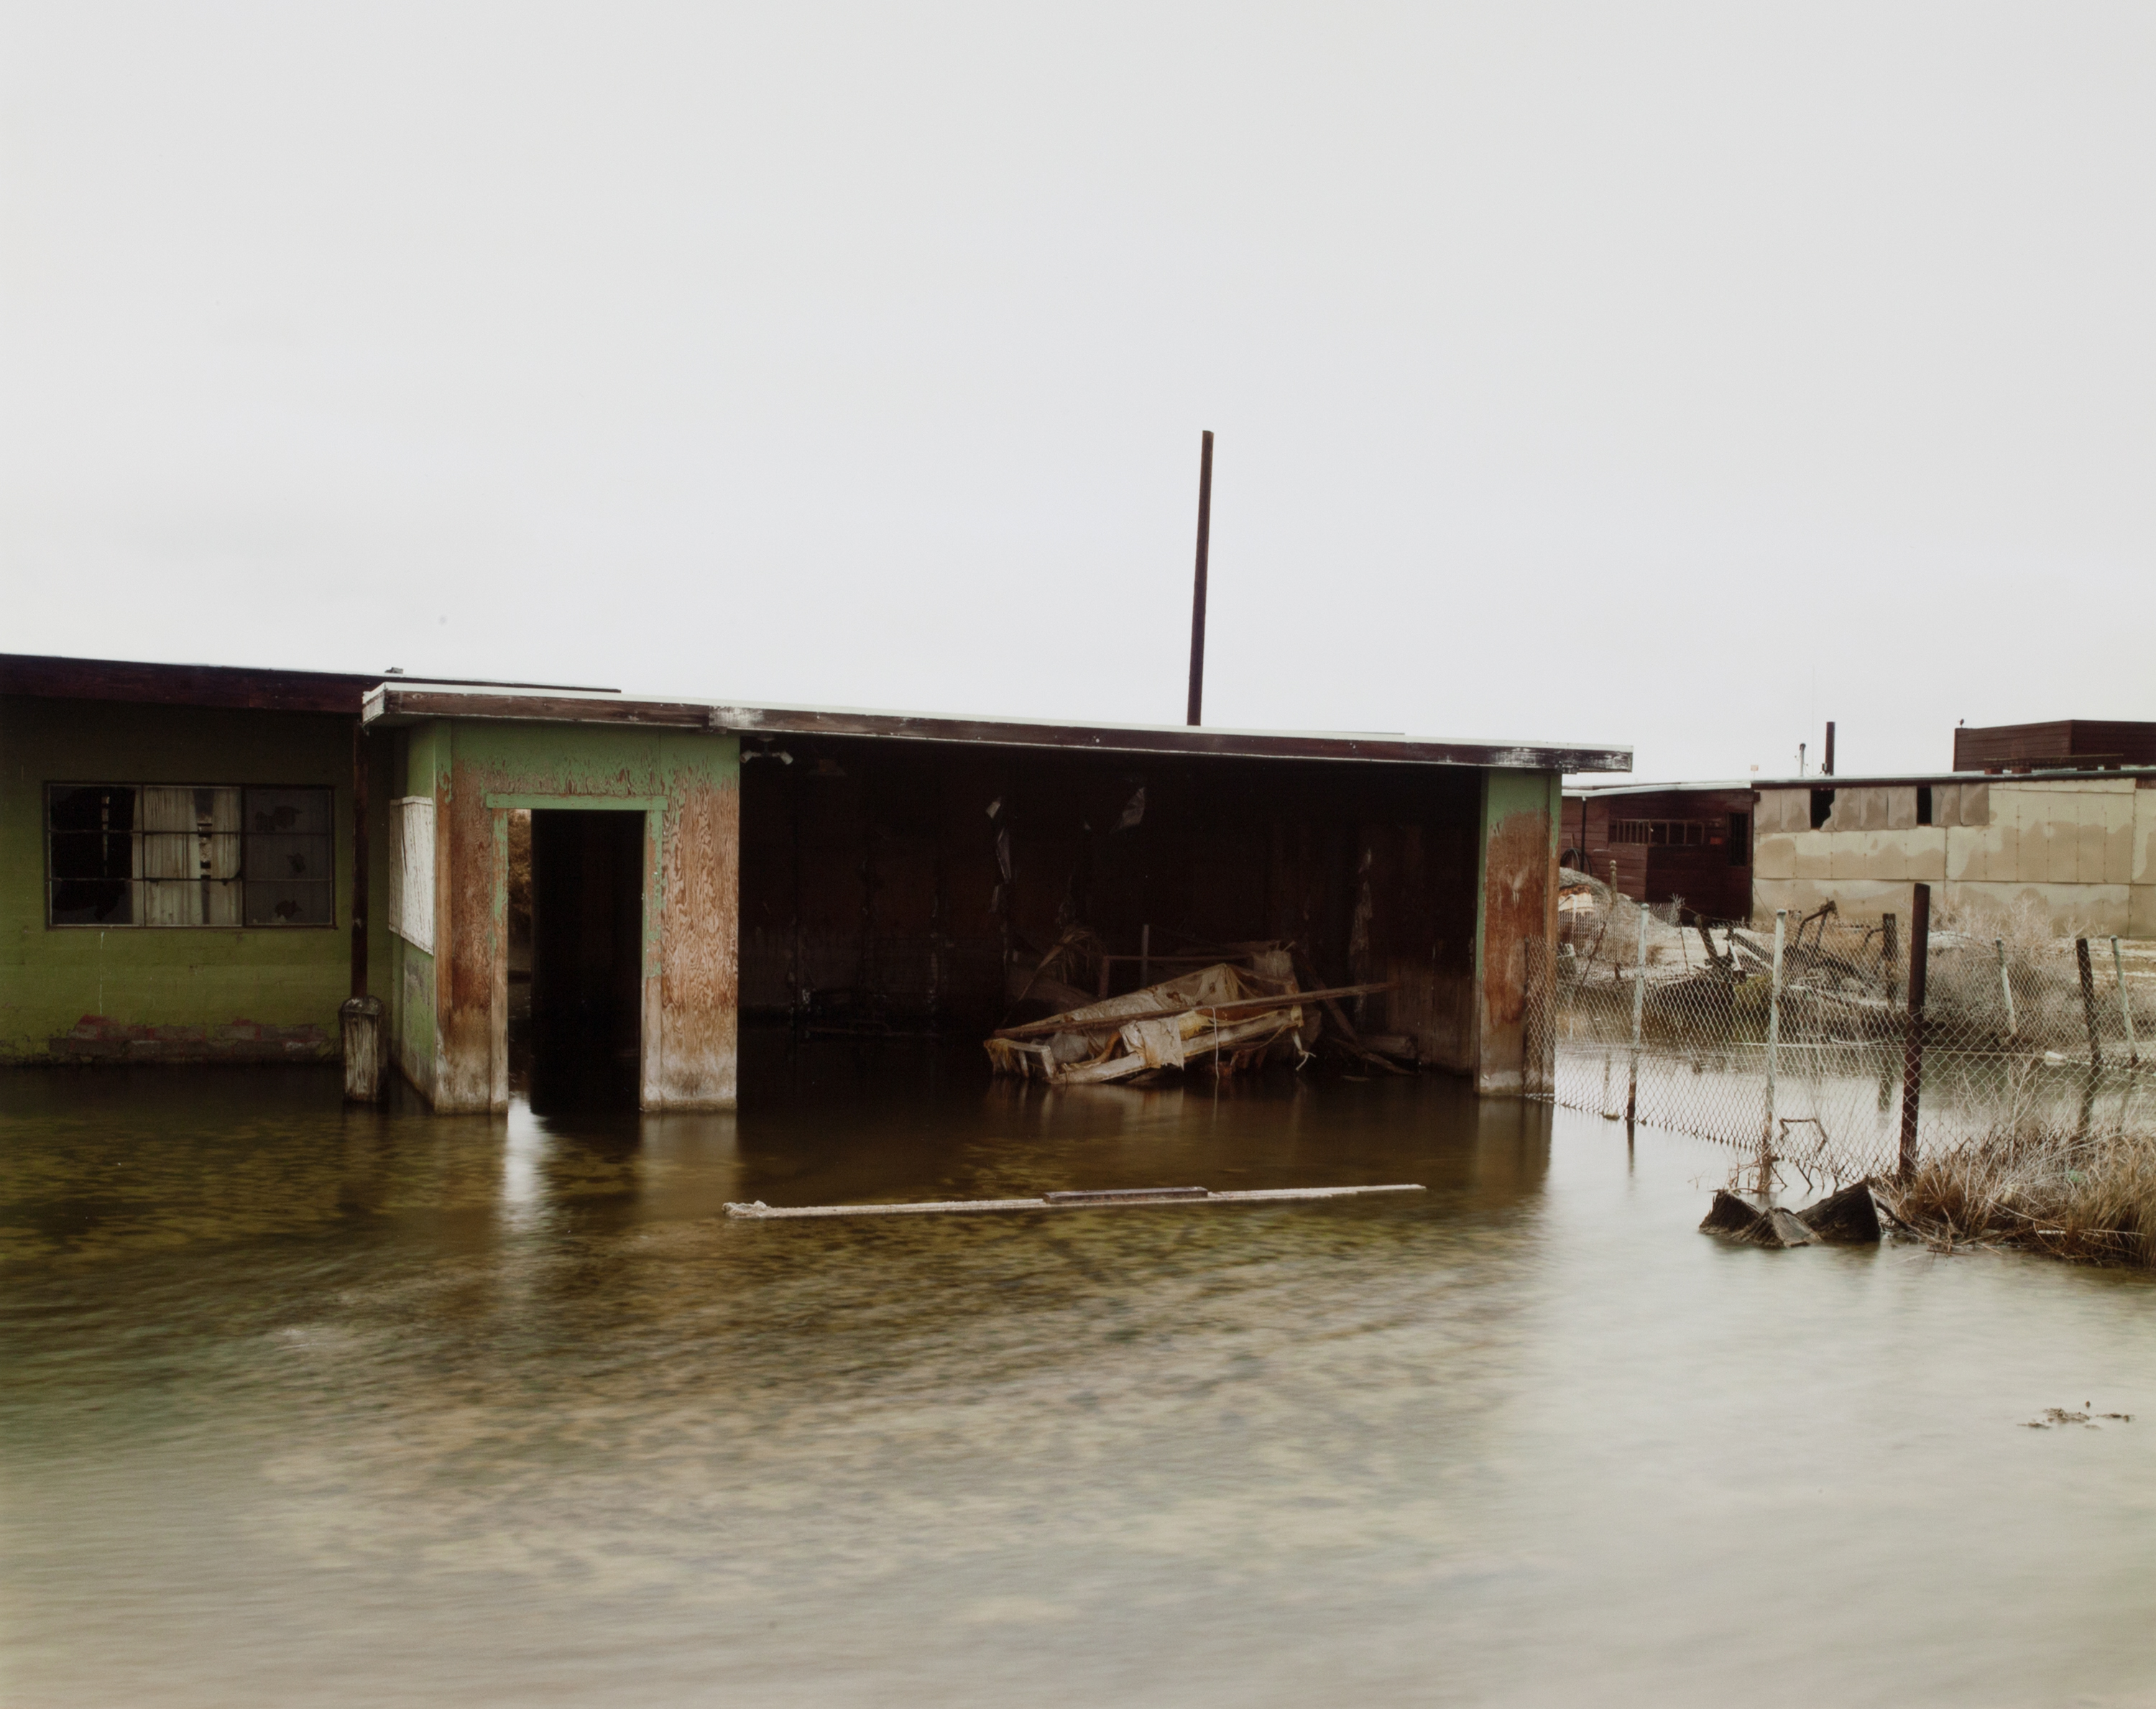 Color photograph of a flooded abandoned garage with a distressed rowboat